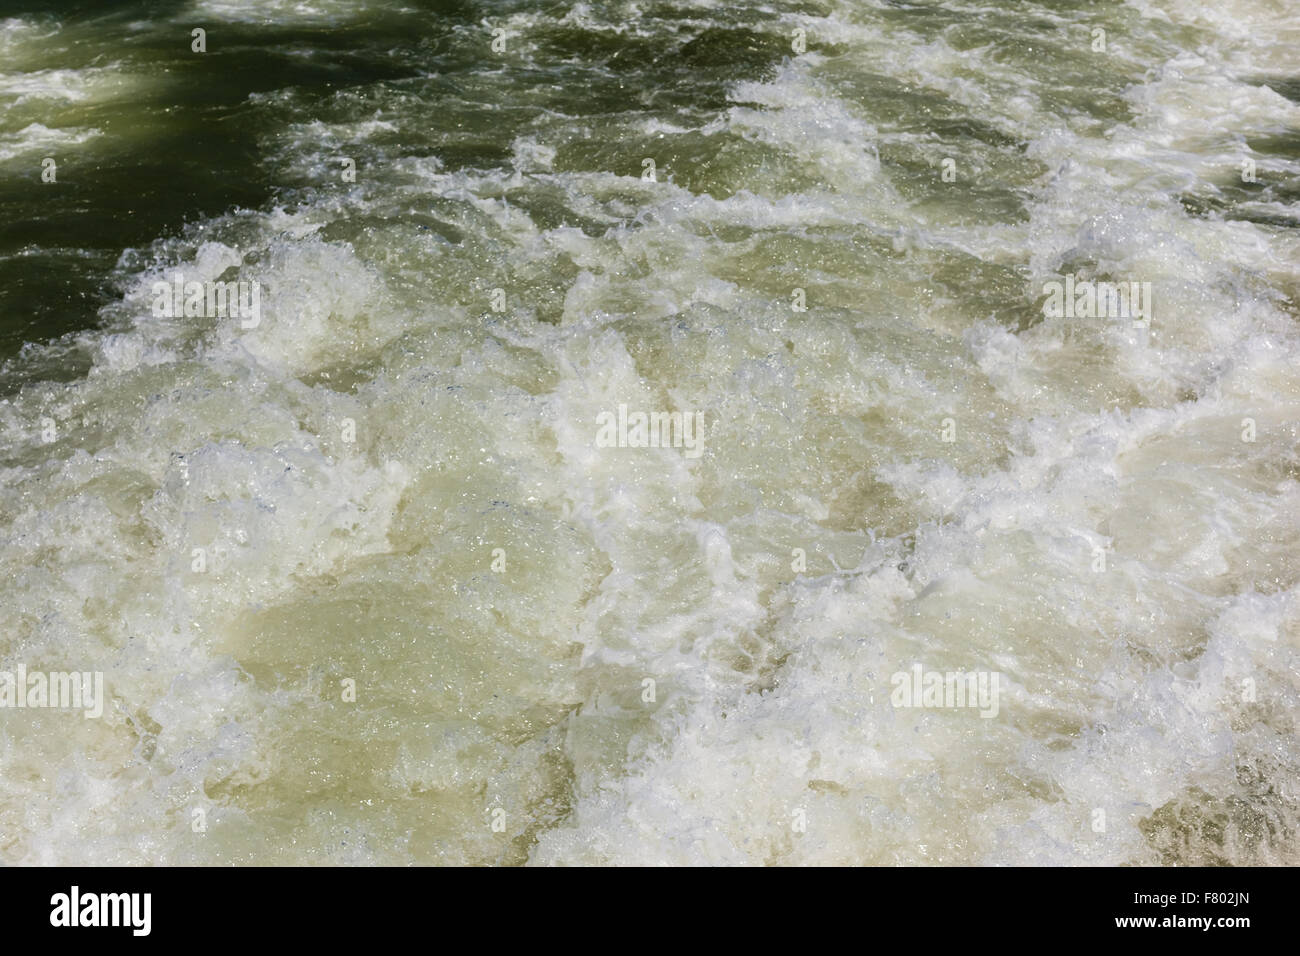 detail of turbid waters being flushed in the sea Stock Photo